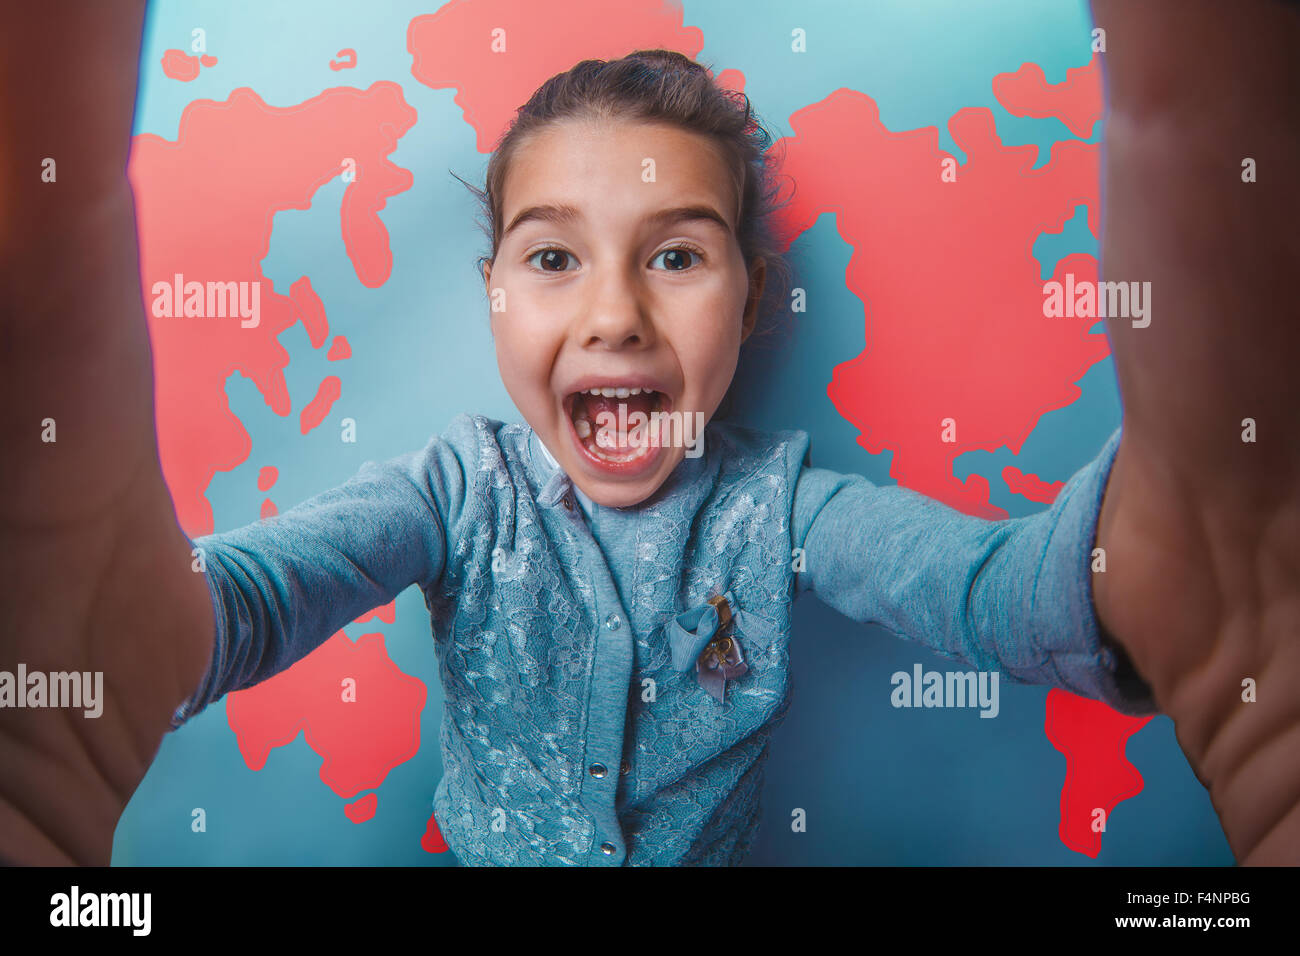 teen girl shouting stretched her arms behind world map background Stock Photo